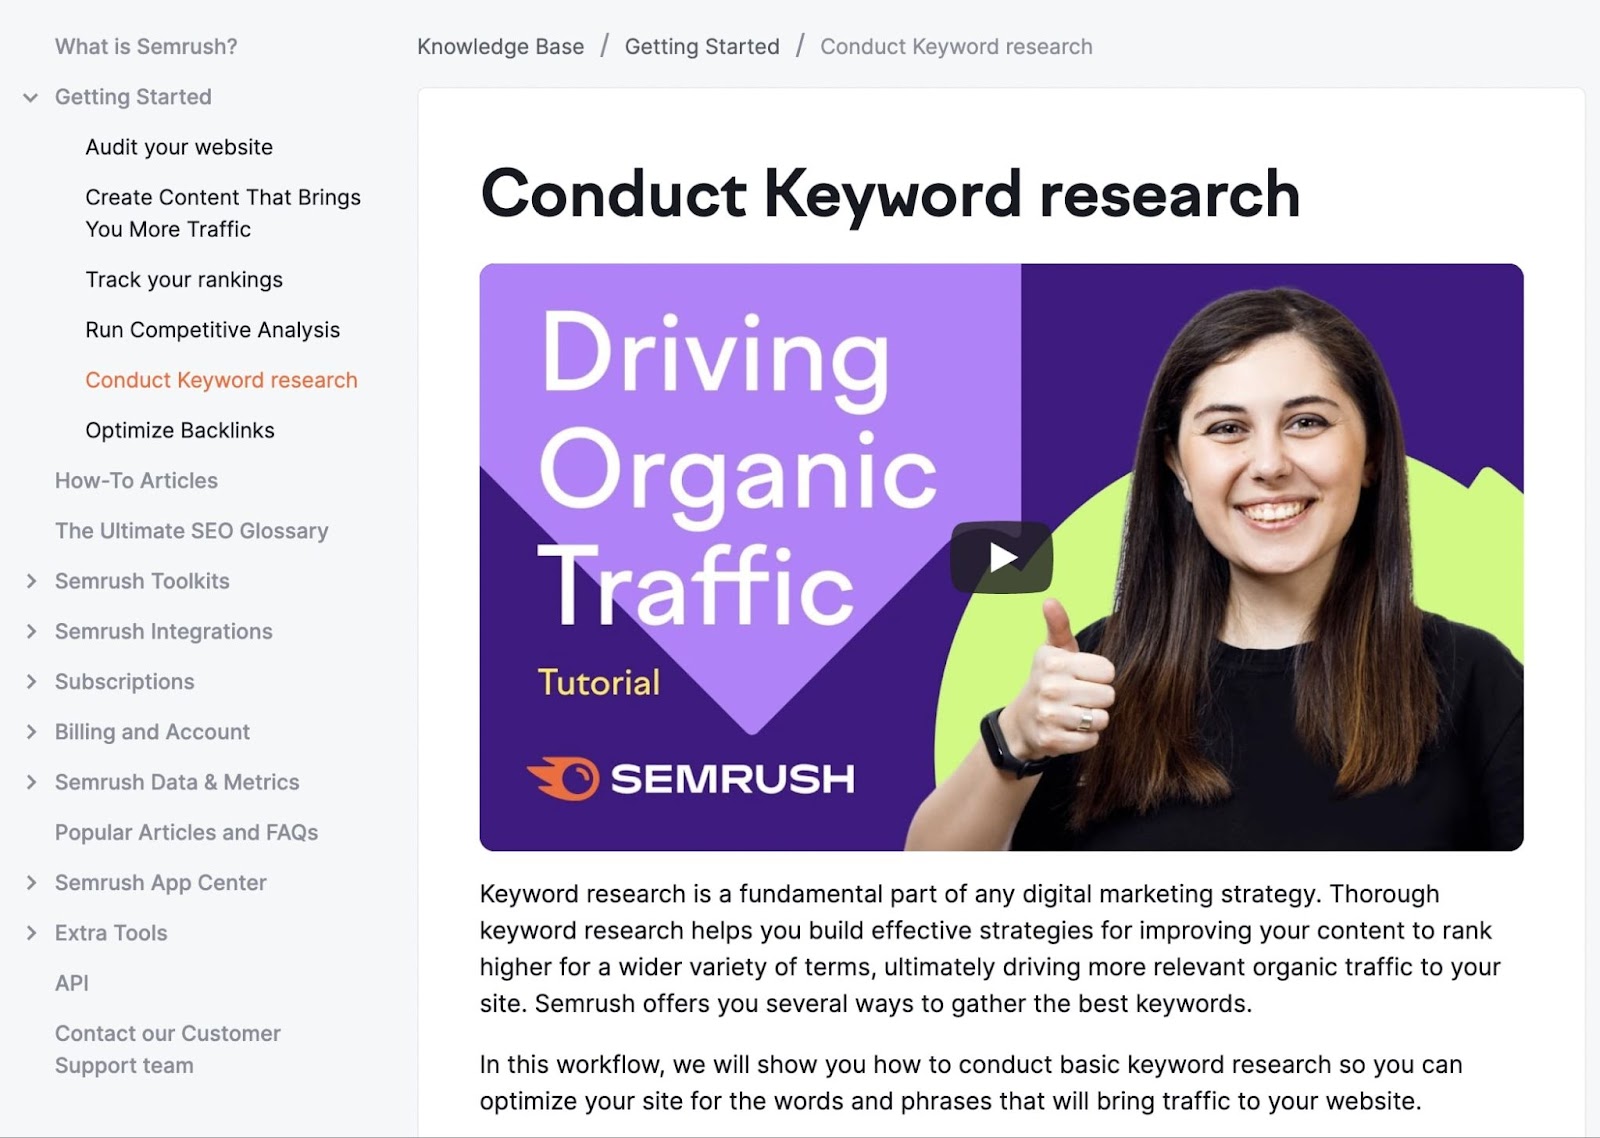 Semrush's knowledge base page on "Conduct Keyword research"